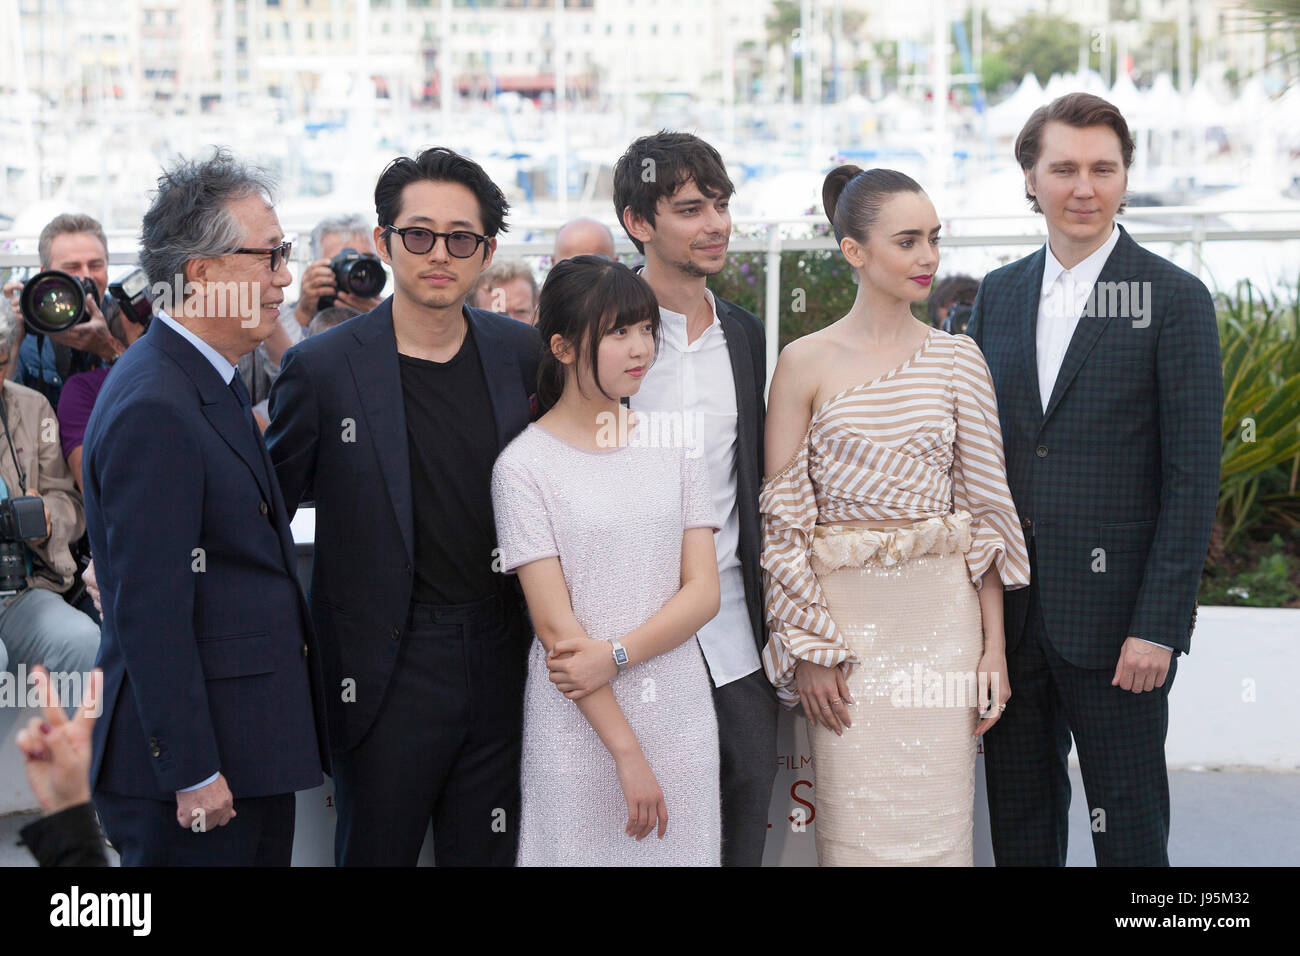 CANNES, FRANCE - MAY 19: (L-R) Actors Byung Heebong, Steven Yeun, Ahn Seo-Hyun, Devon Bostick, Lily Collins and Paul Dano attend the 'Okja' photocall during the 70th annual Cannes Film Festival at Palais des Festivals on May 19, 2017 in Cannes, France. Laurent Koffel/Alamy Live News Stock Photo